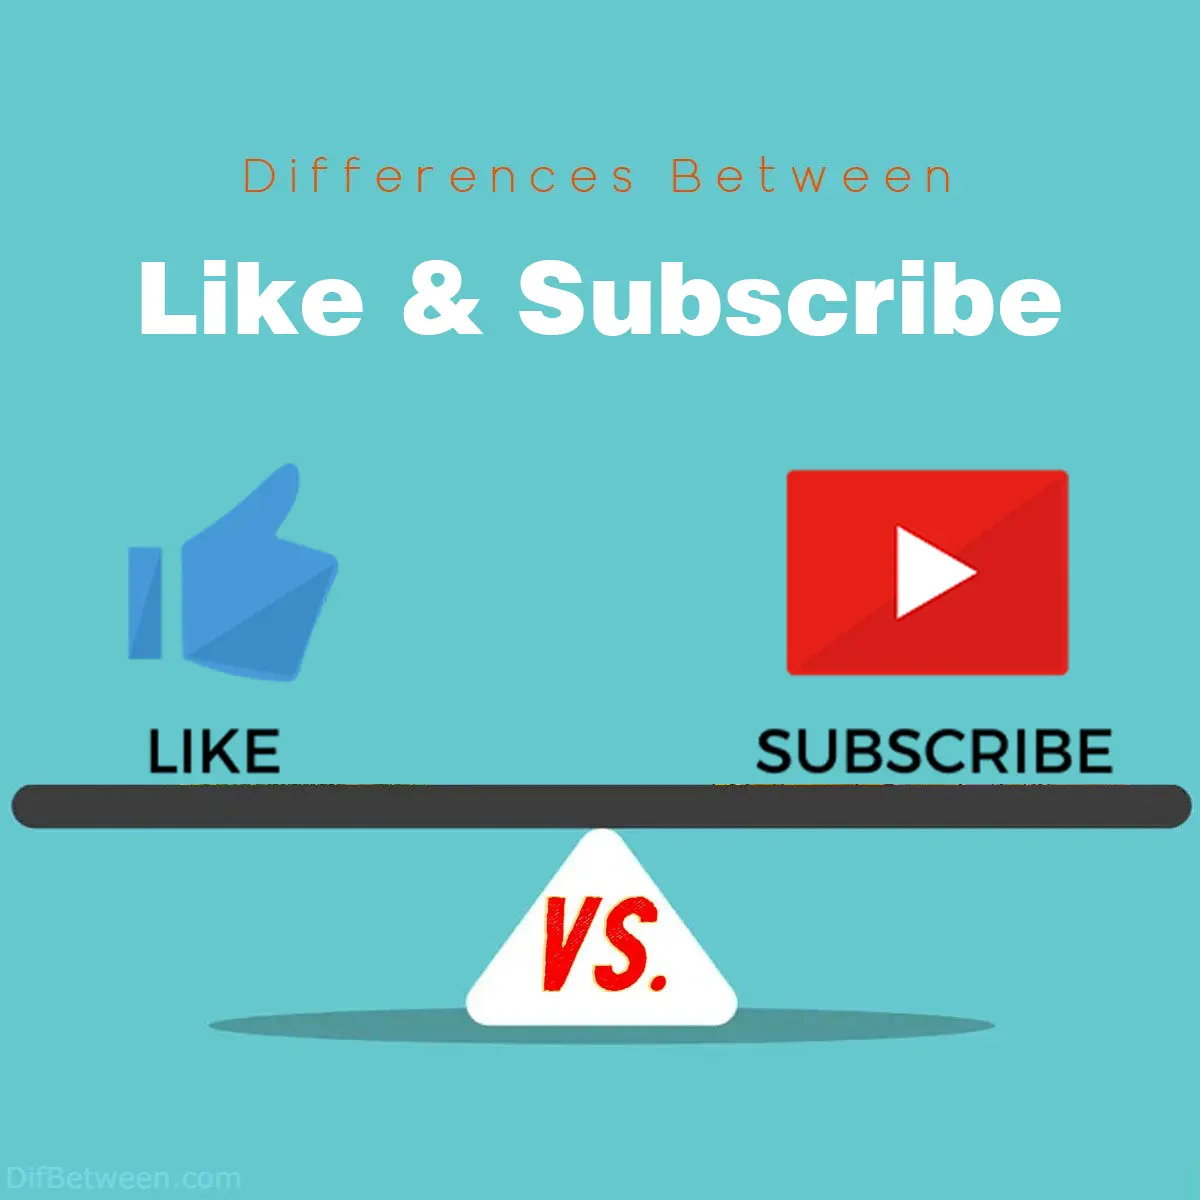 Differences Between Like and Subscribe